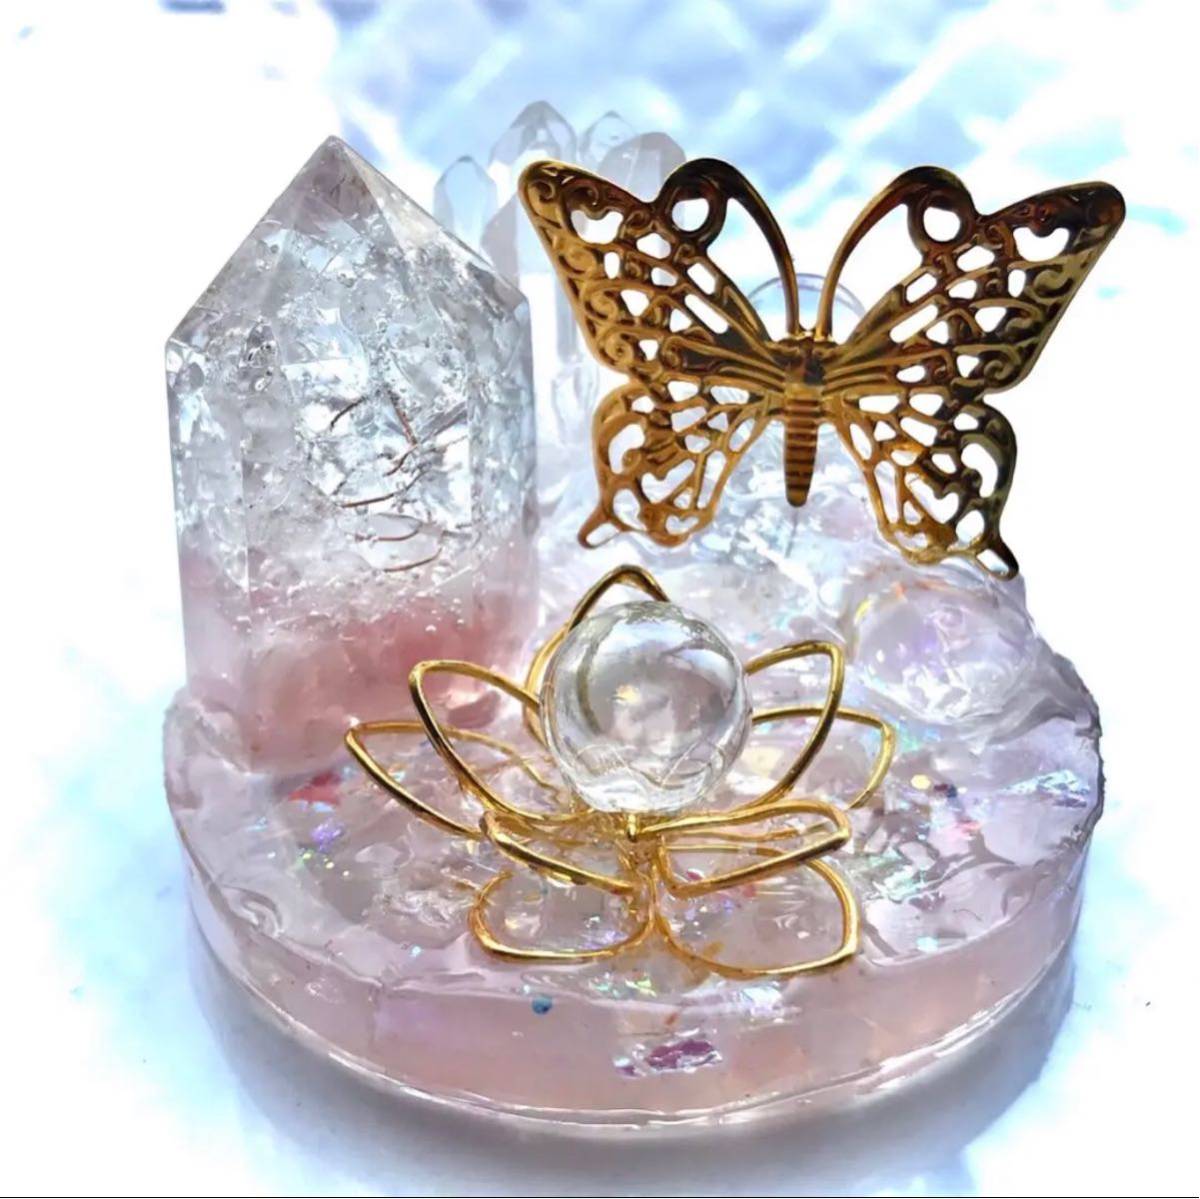 ◇Butterflies and flowers◇Orgonite◇Object◇Rose quartz◇Himalayan crystal◇, Handmade items, interior, miscellaneous goods, ornament, object